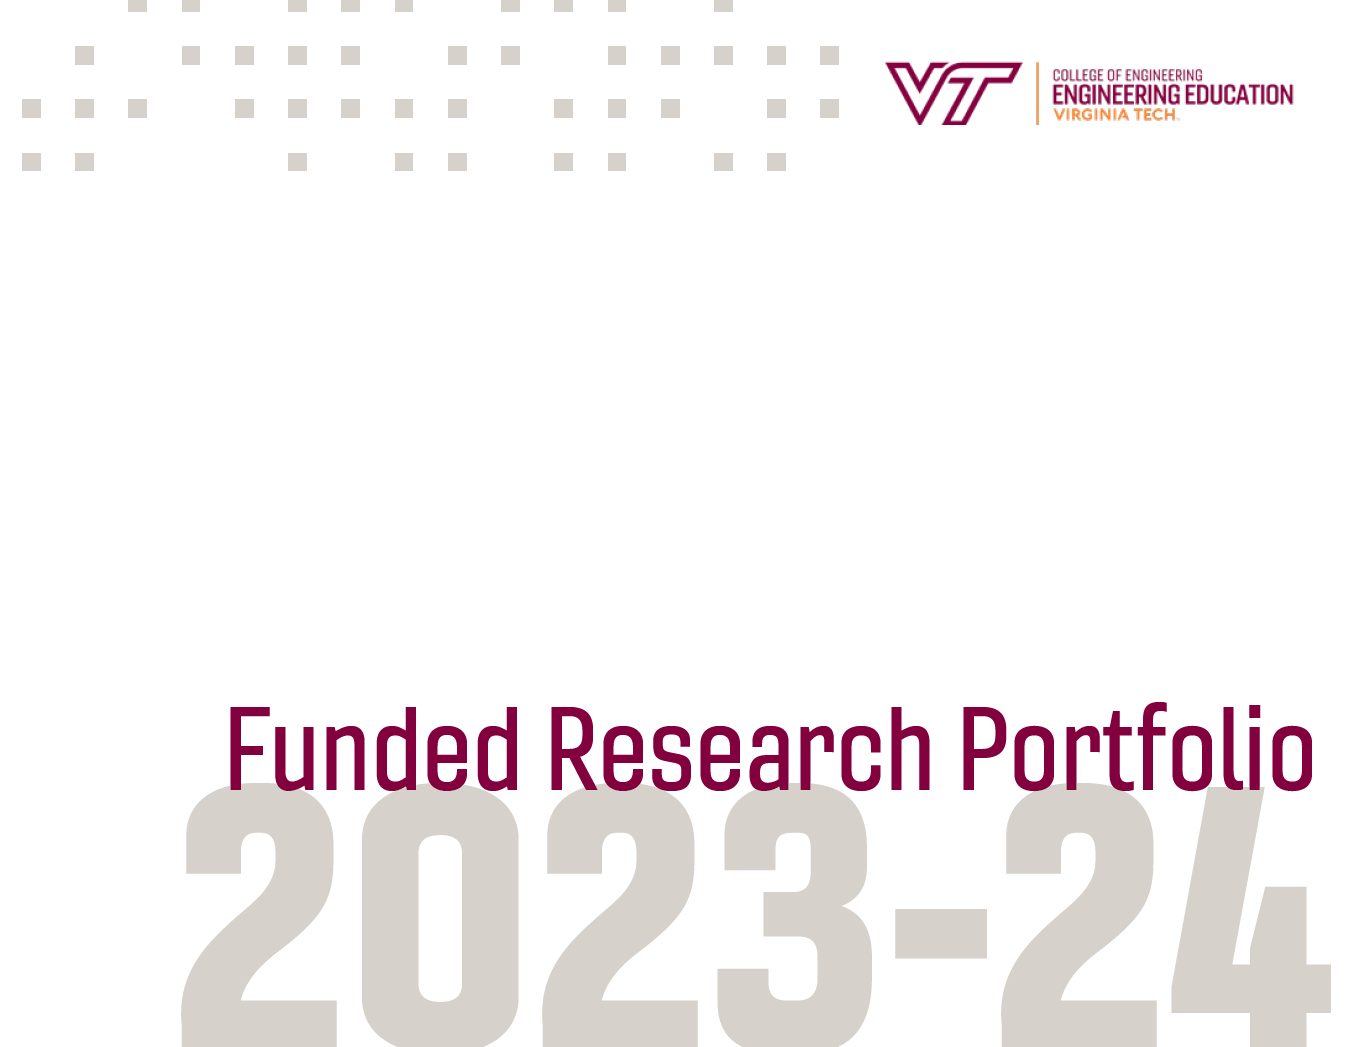 The cover of the 2023-24 Funded Research Portfolio for Engineering Education. The image is a link that takes you to the full portfolio PDF.